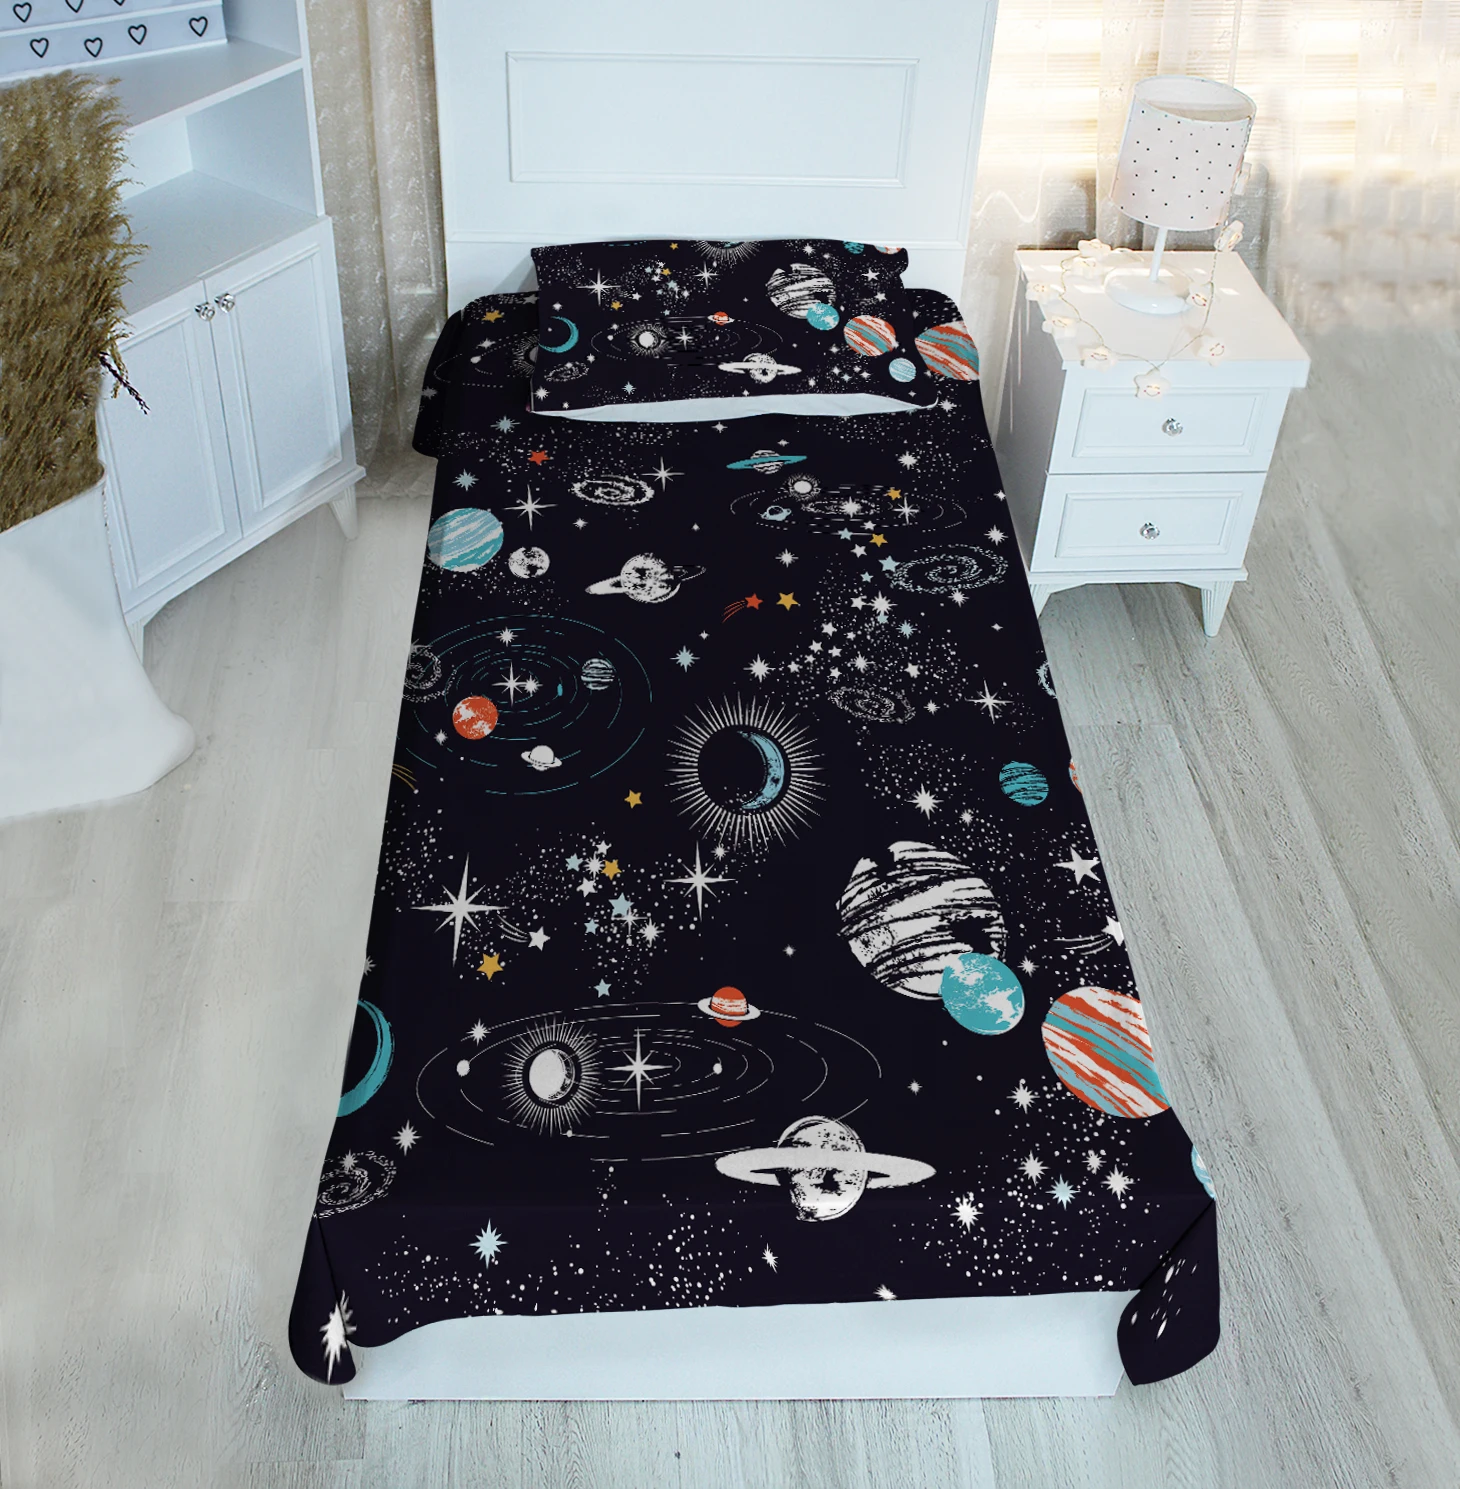 

Black single bed cover black space planet astronaut Moon star patterned velvet fabric Free Shipping quality product kids room